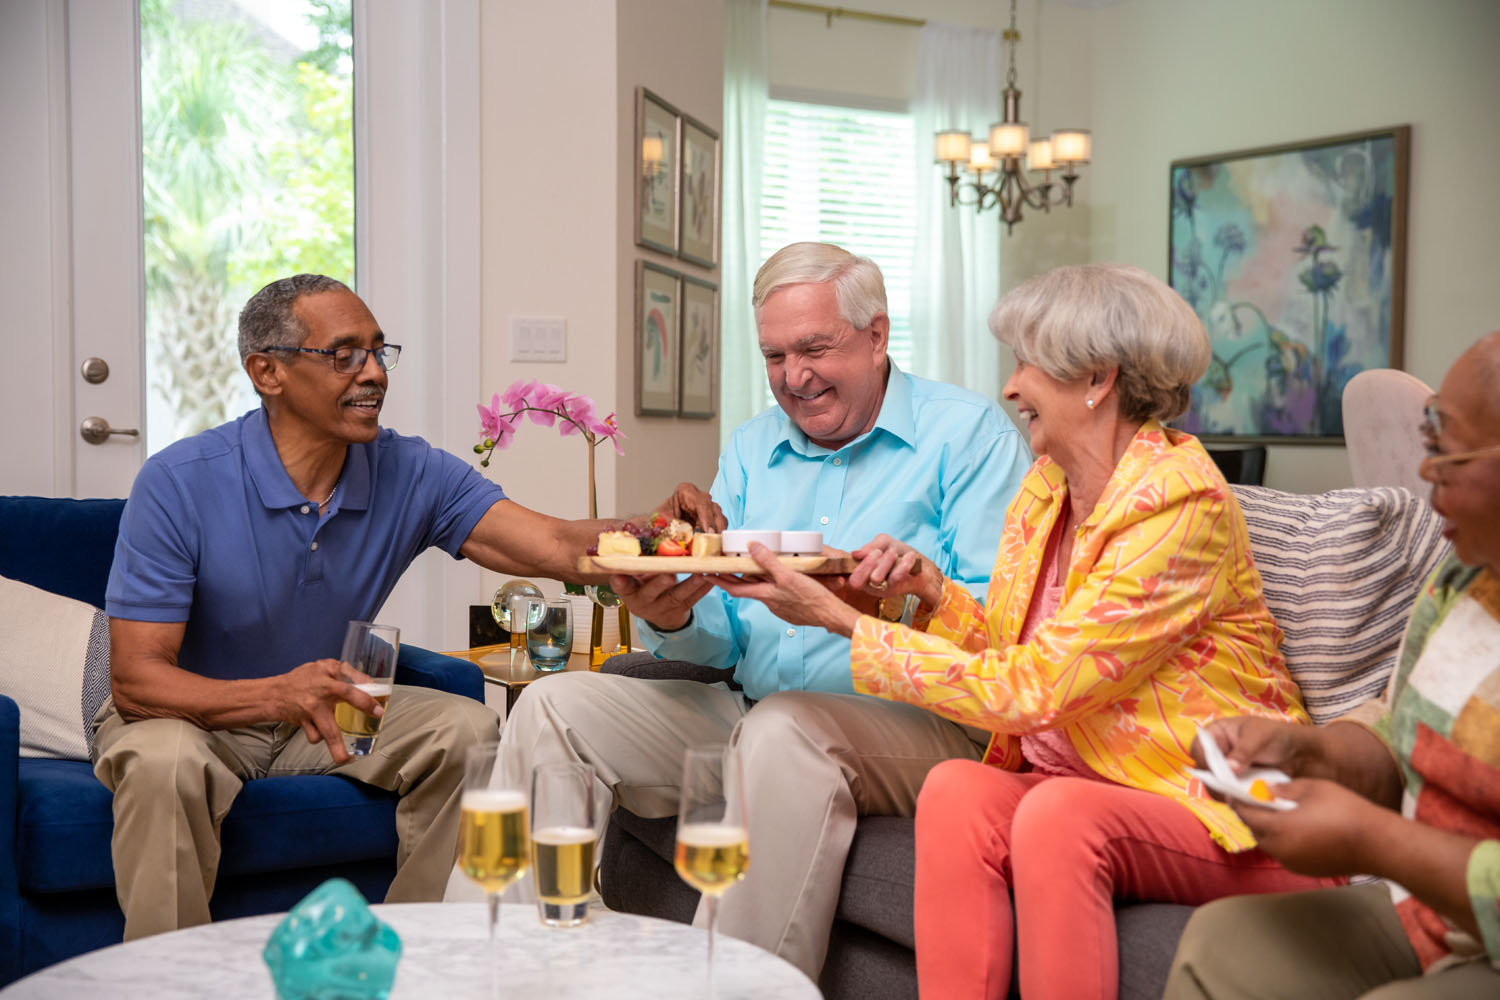 Residents in apartment passing appetizer plate